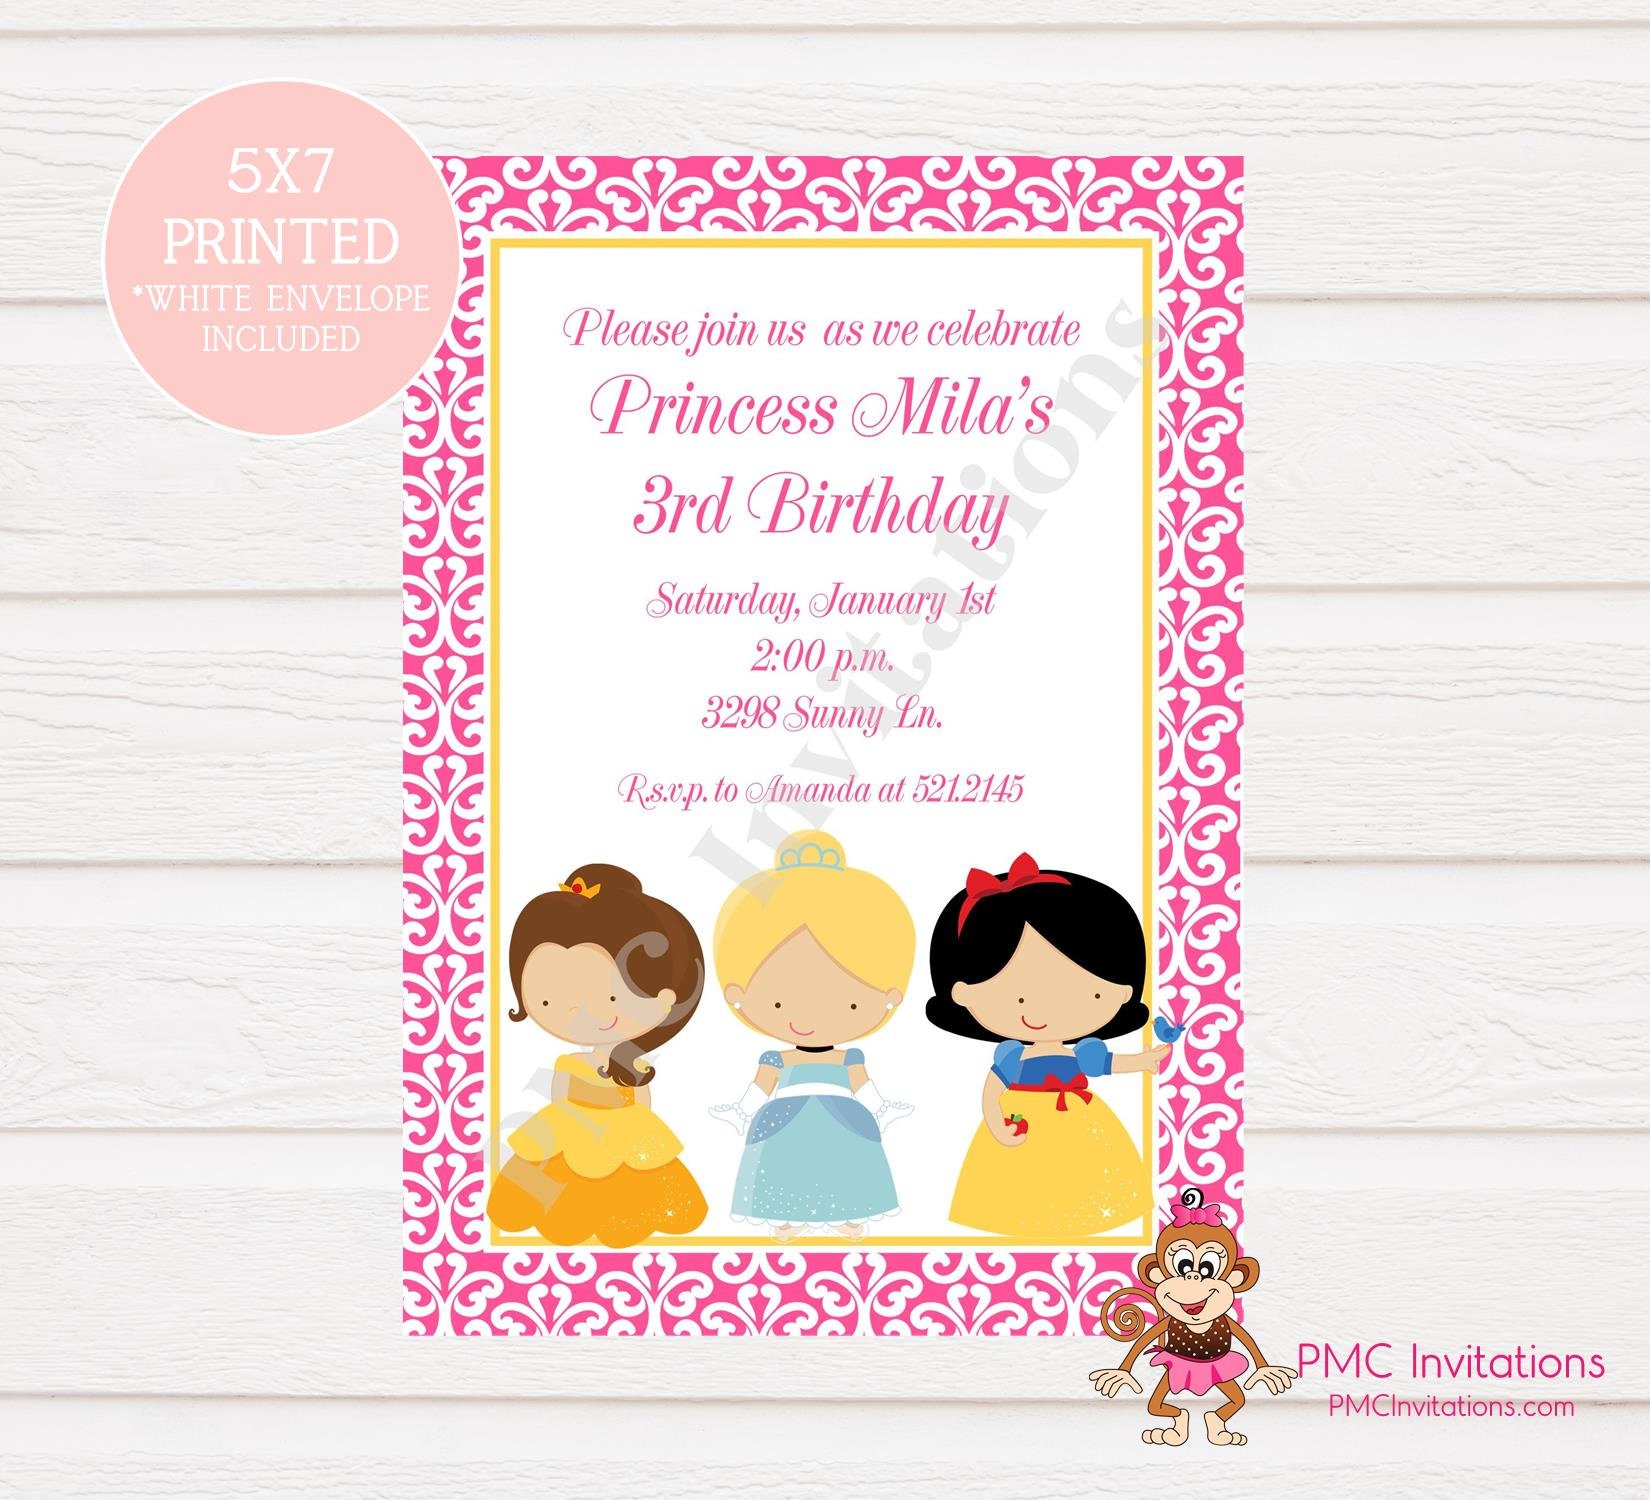 20 Stitch Party Invites Invitations Princess Theme Gift Cards Party Supplies with Envelope